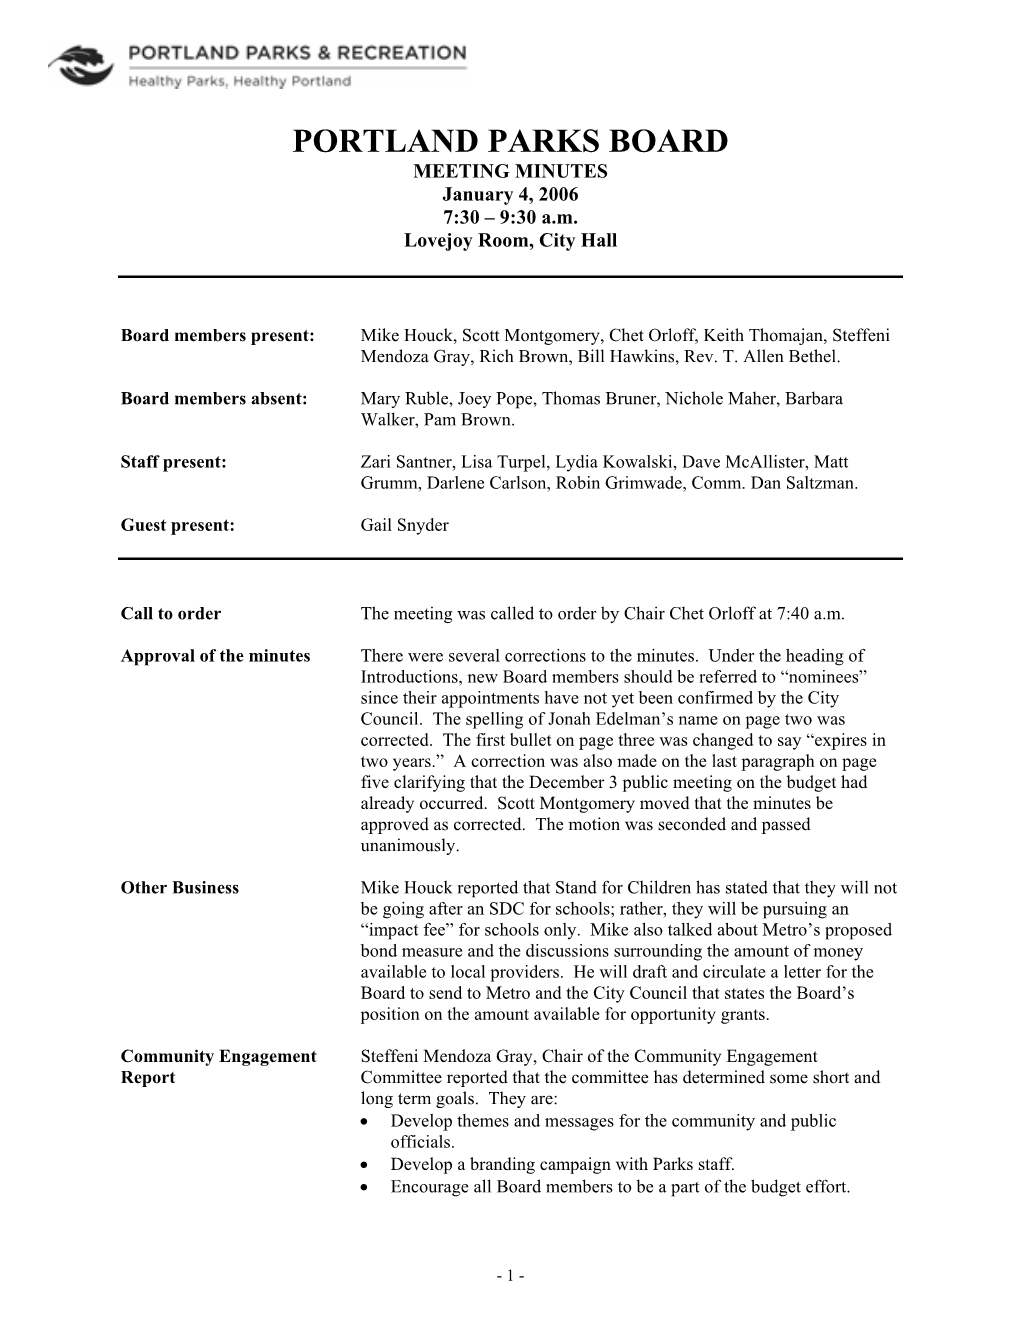 PORTLAND PARKS BOARD MEETING MINUTES January 4, 2006 7:30 – 9:30 A.M